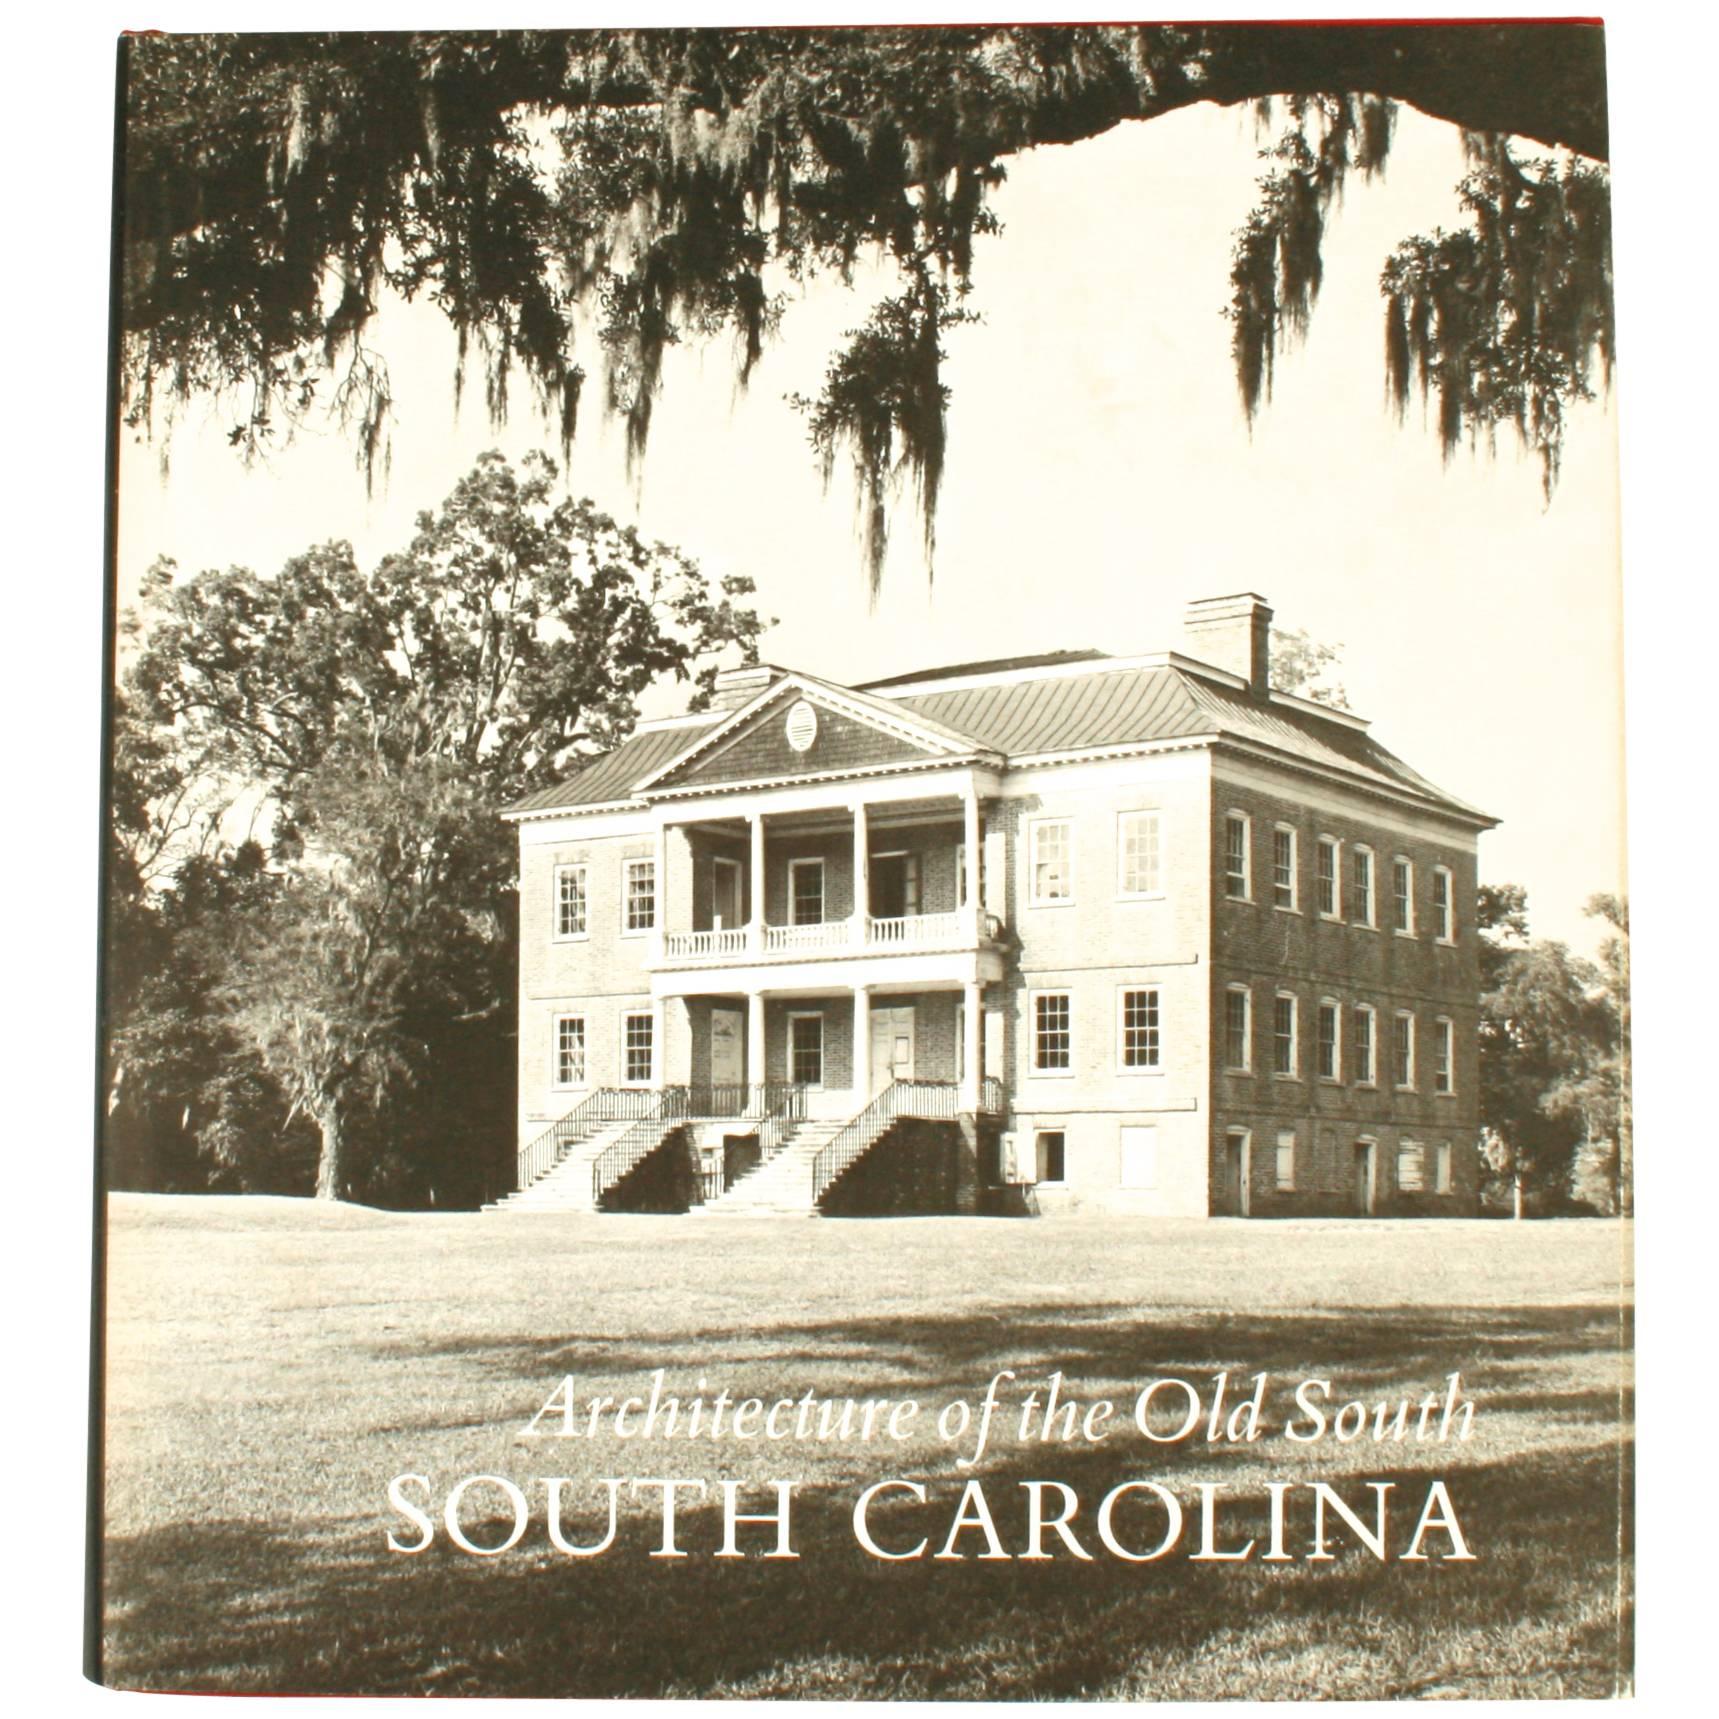 Architecture of the Old South: South Carolina First Edition by Mills Lane